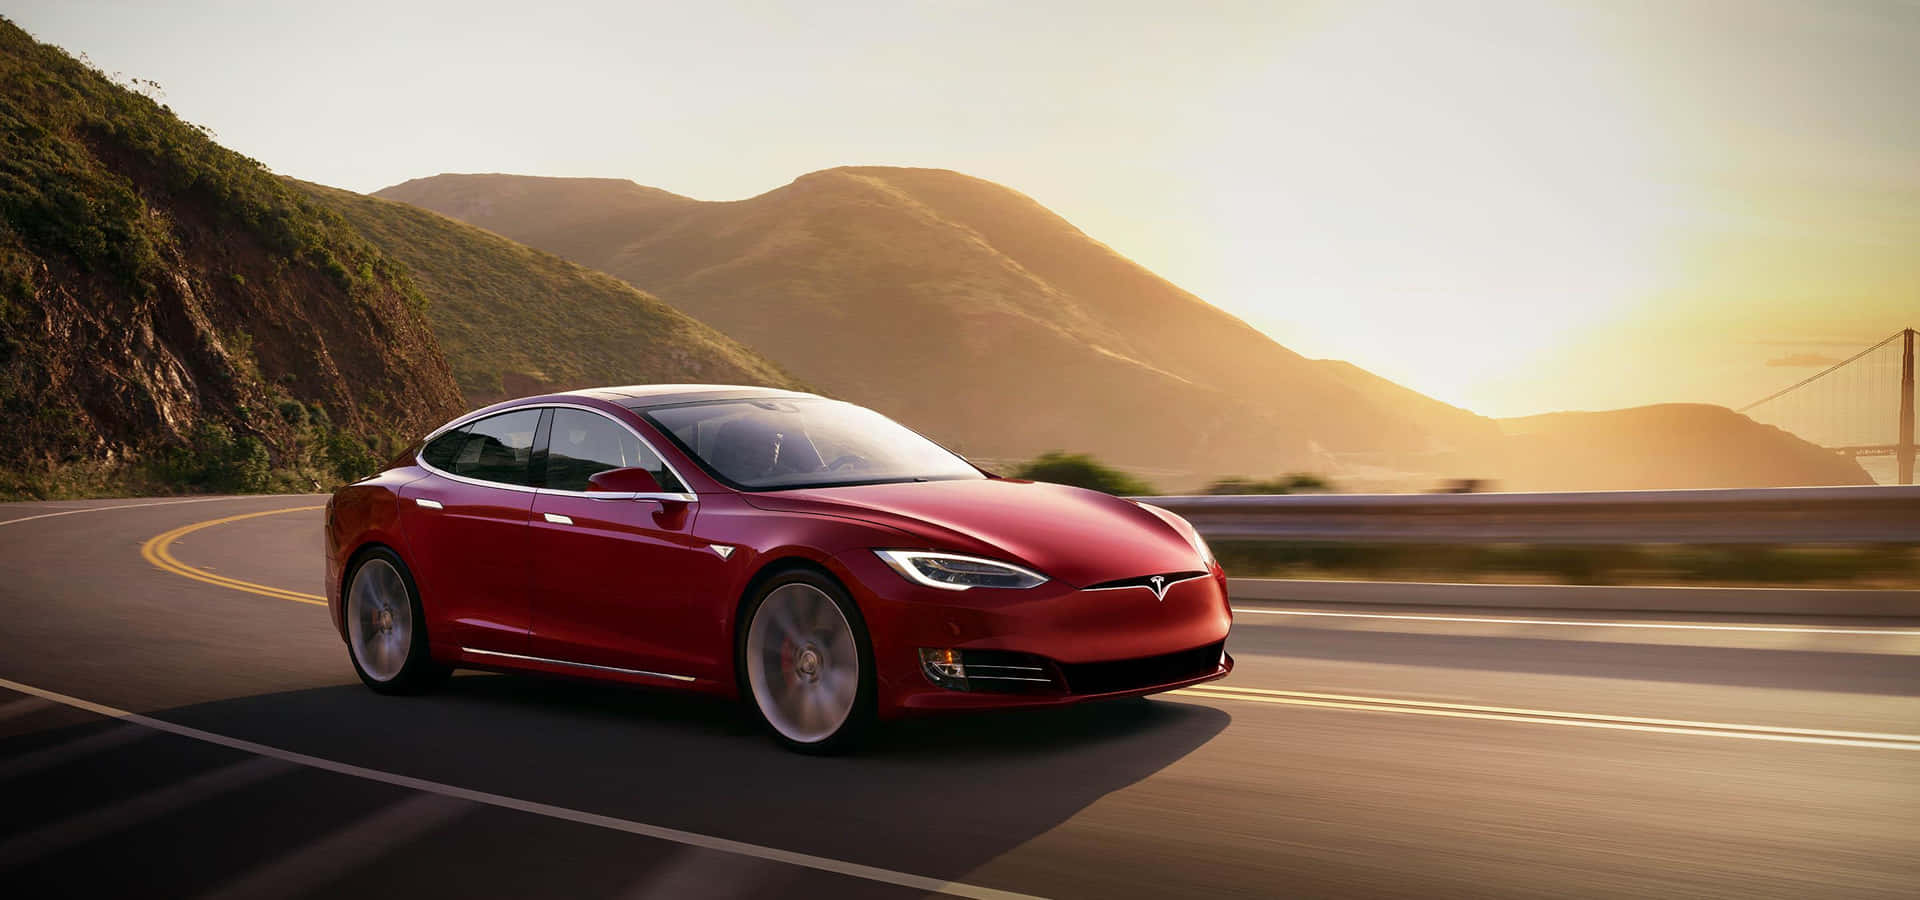 The All-electric Tesla Model 3